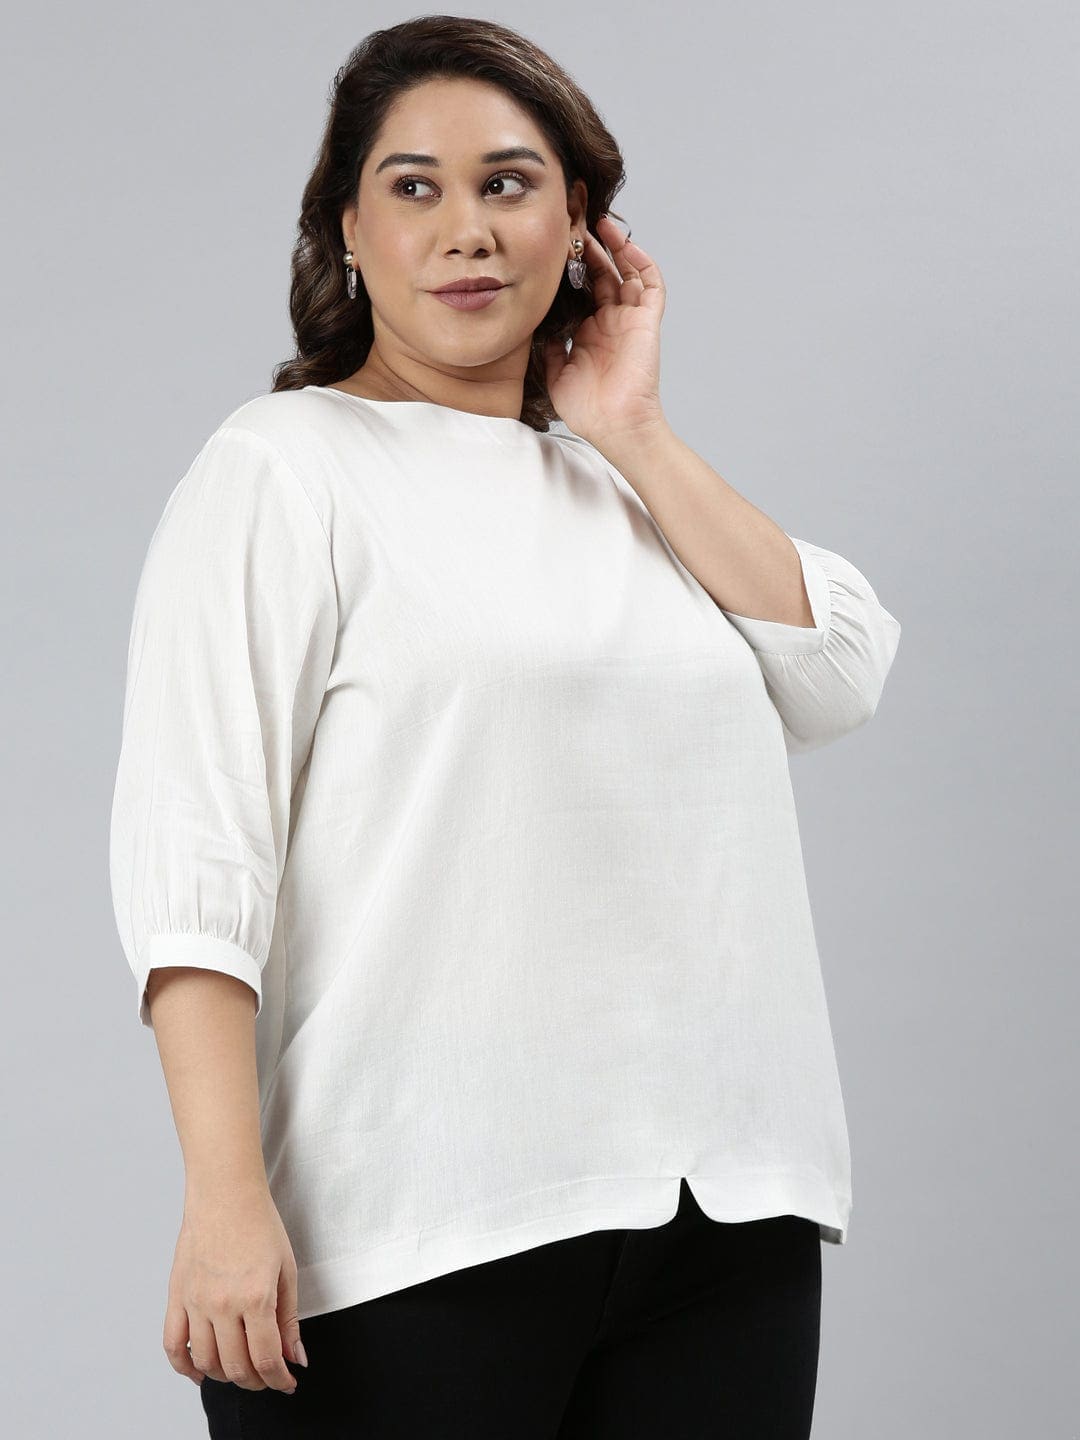 buy TheShaili white cotton tops at best prices   India